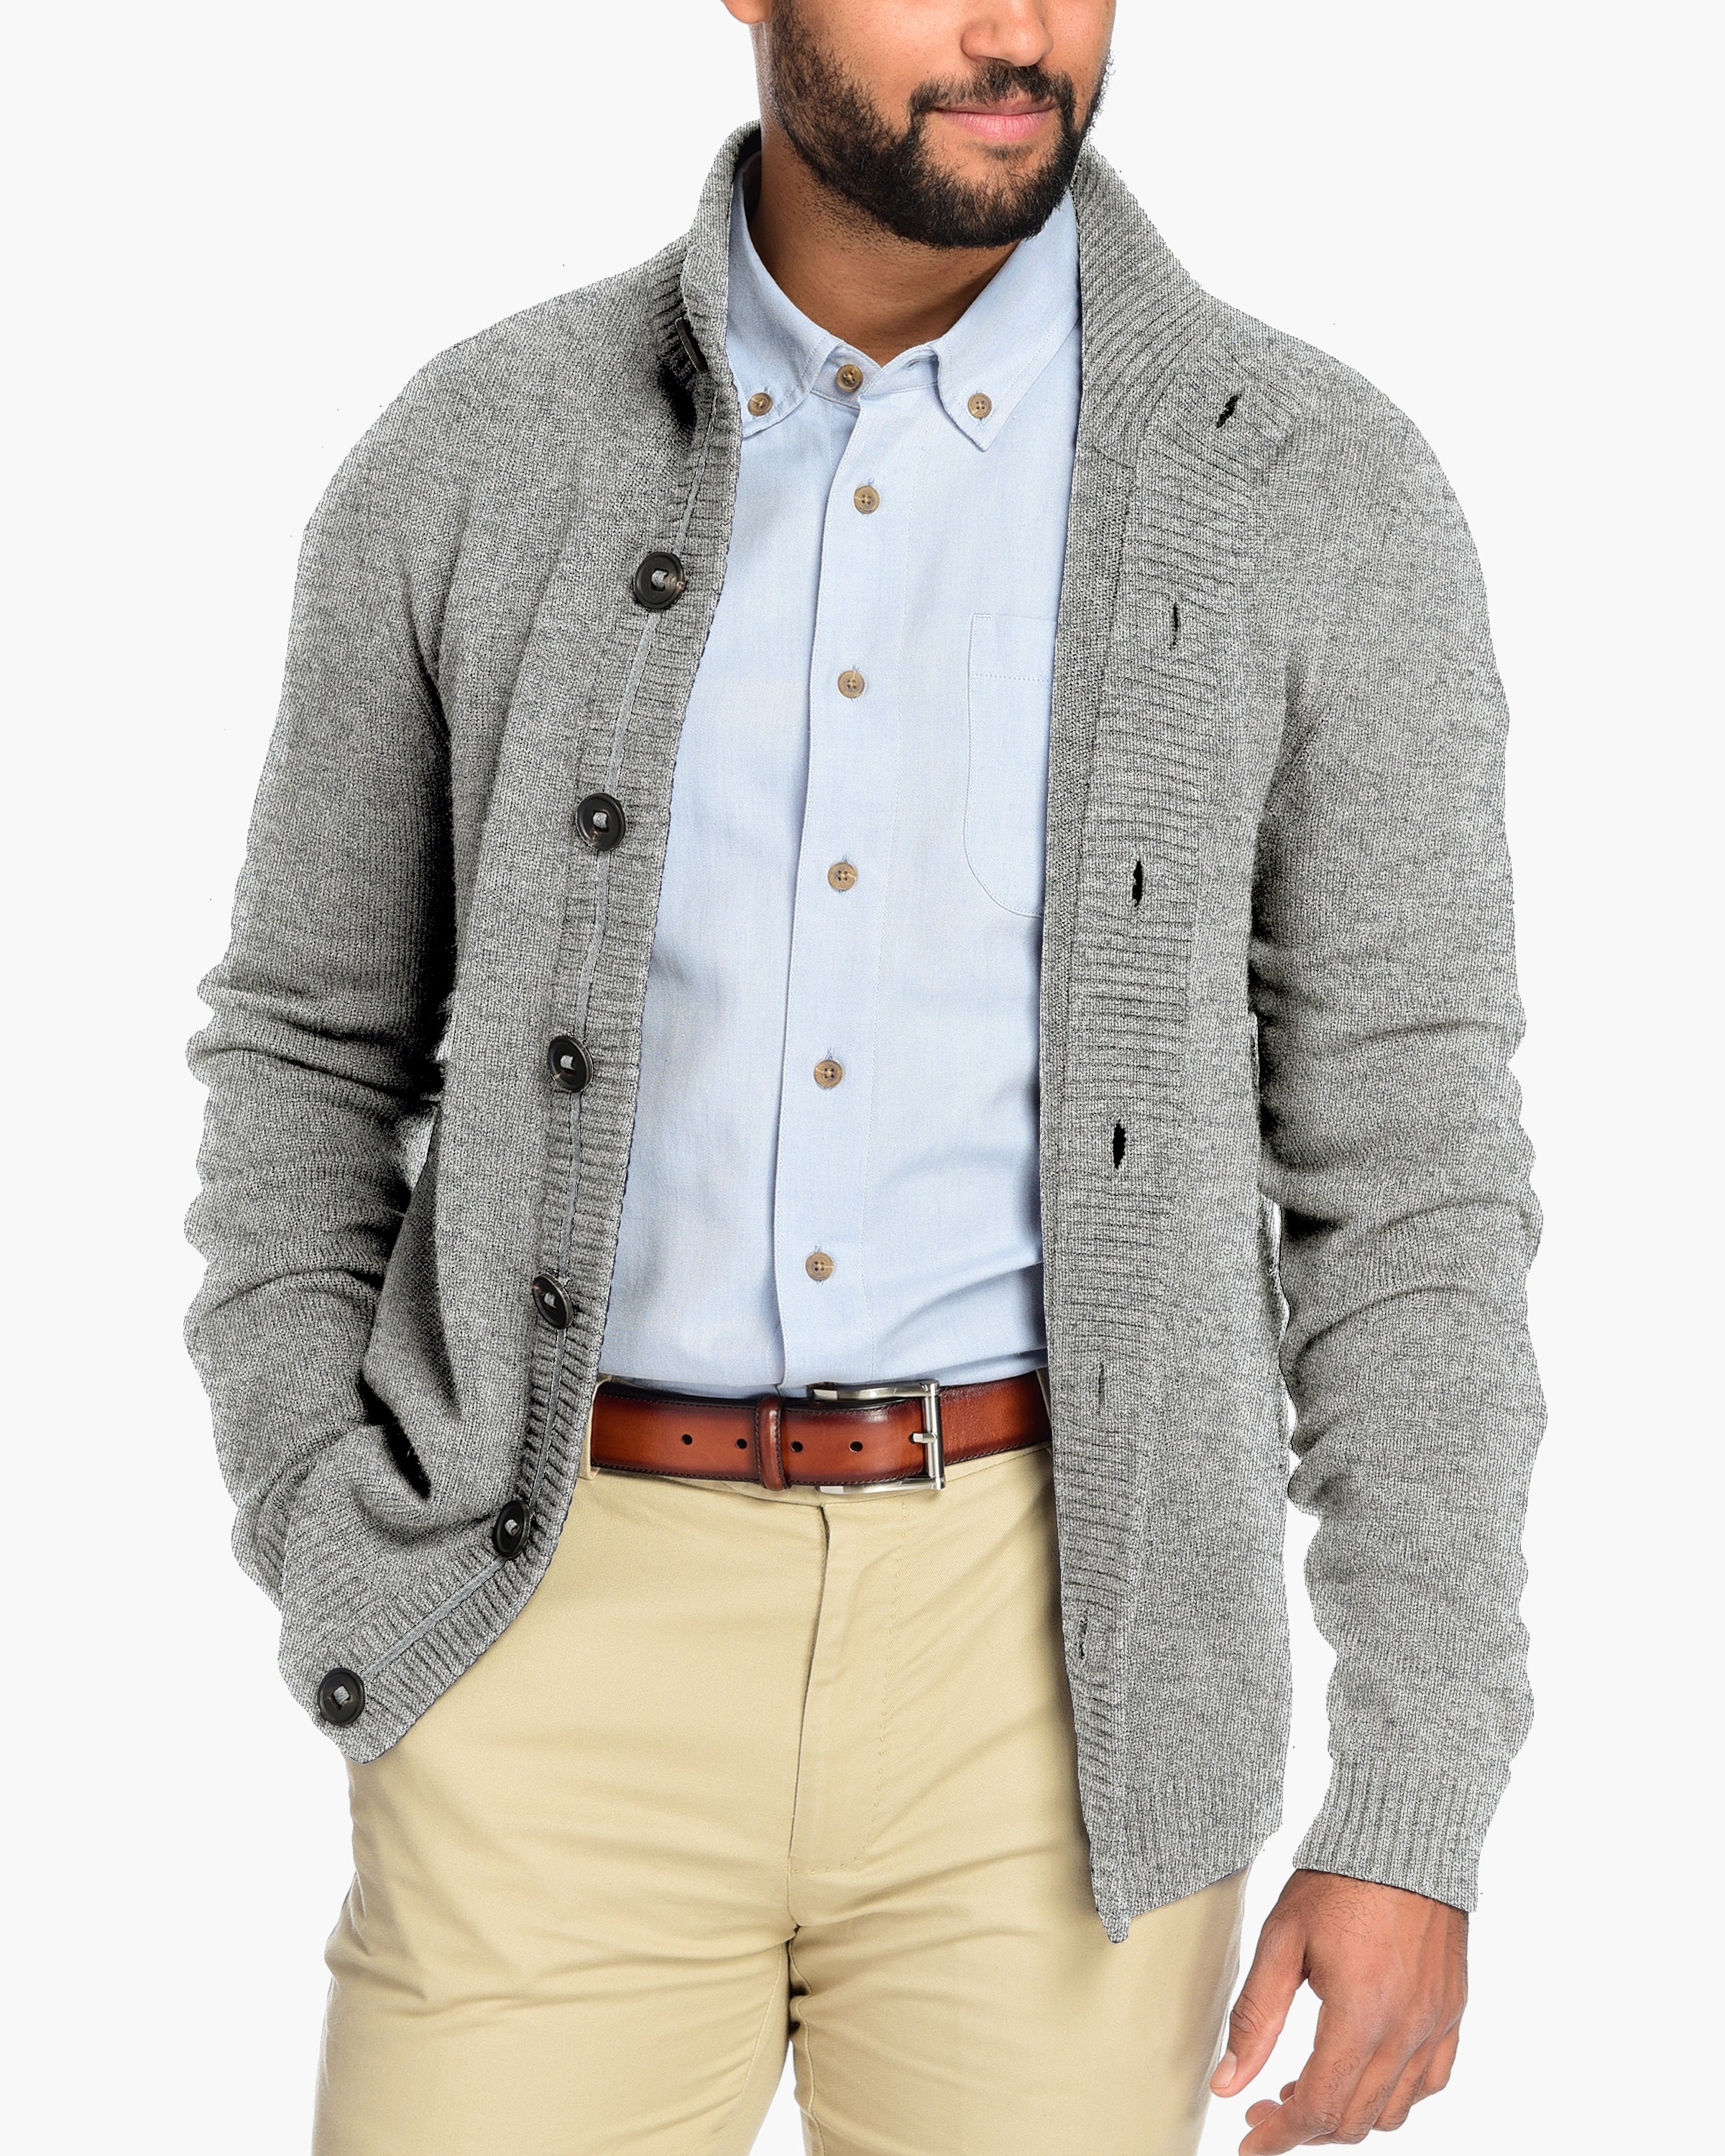 Men's Cardigan Sweater the Palmer Cardigan Sweater by Fisher + Baker